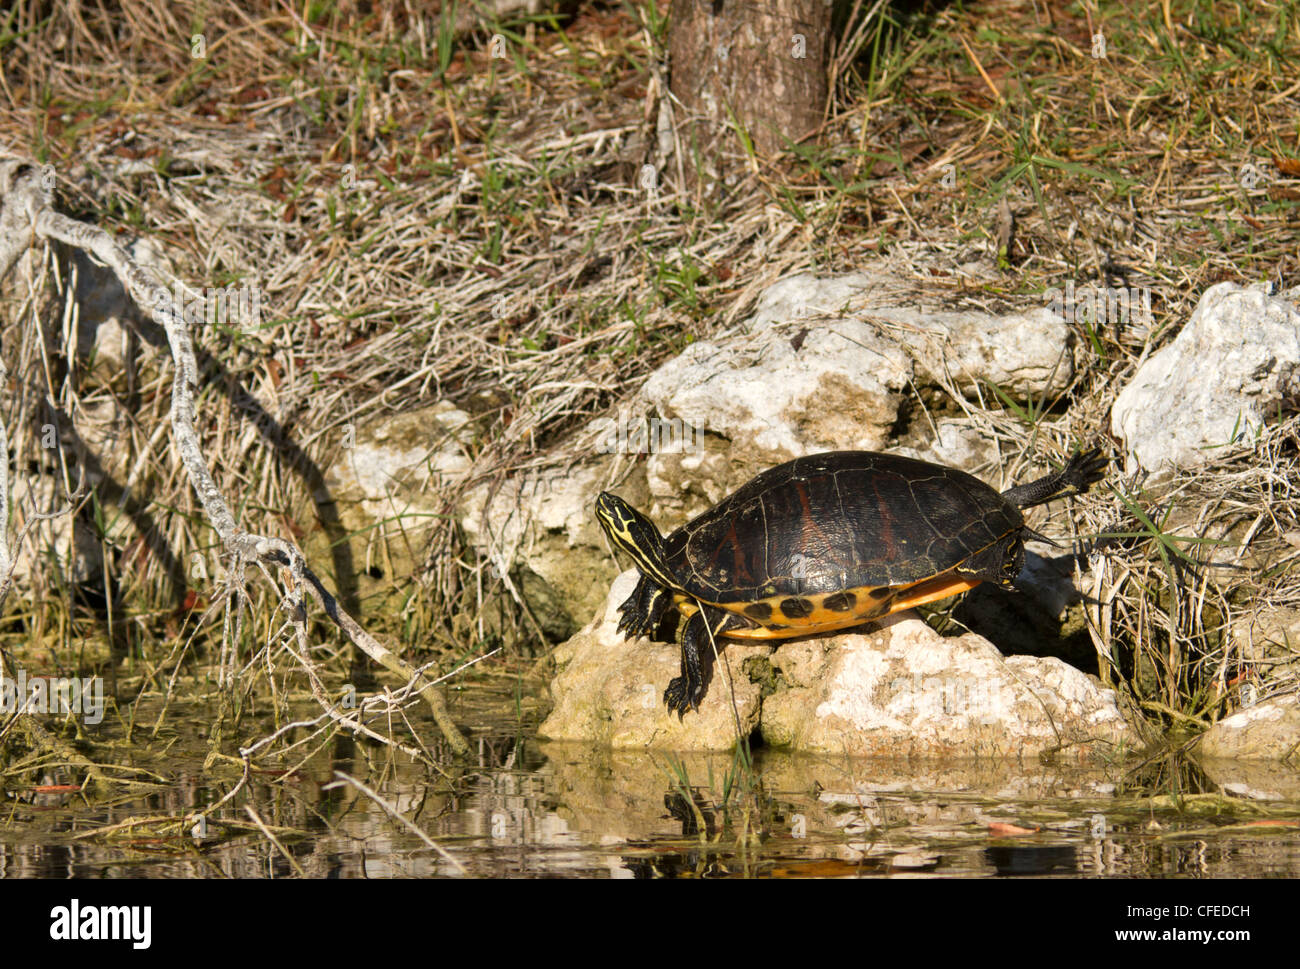 Florida Redbelly Cooter (Pseudemys nelsoni) sunning itself on a river bank. Stock Photo